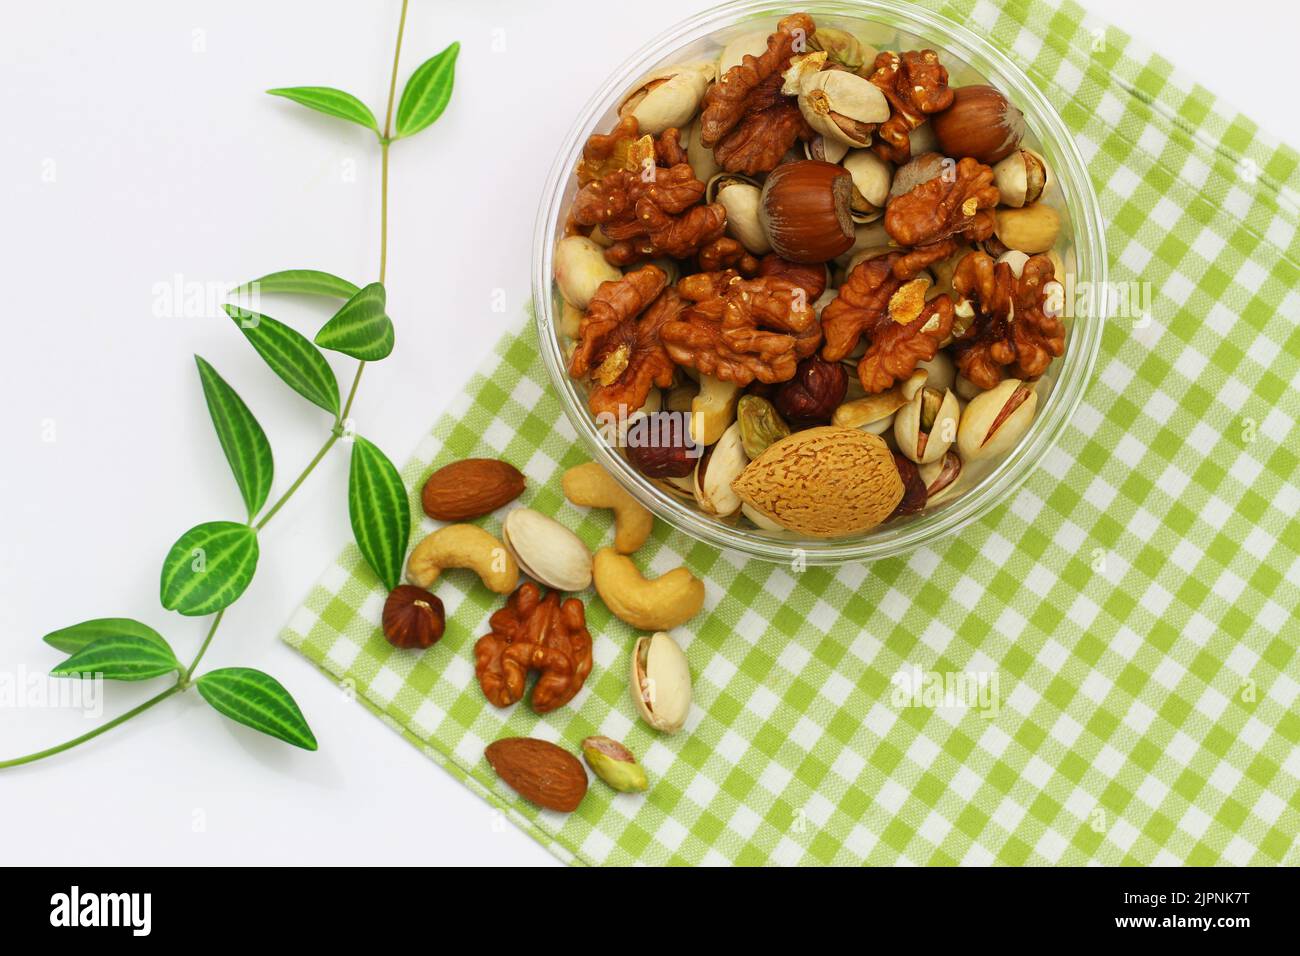 Pistachios, walnuts, cashew nuts, hazelnuts, peanuts, almonds in bowl on green and white checkered cloth Stock Photo